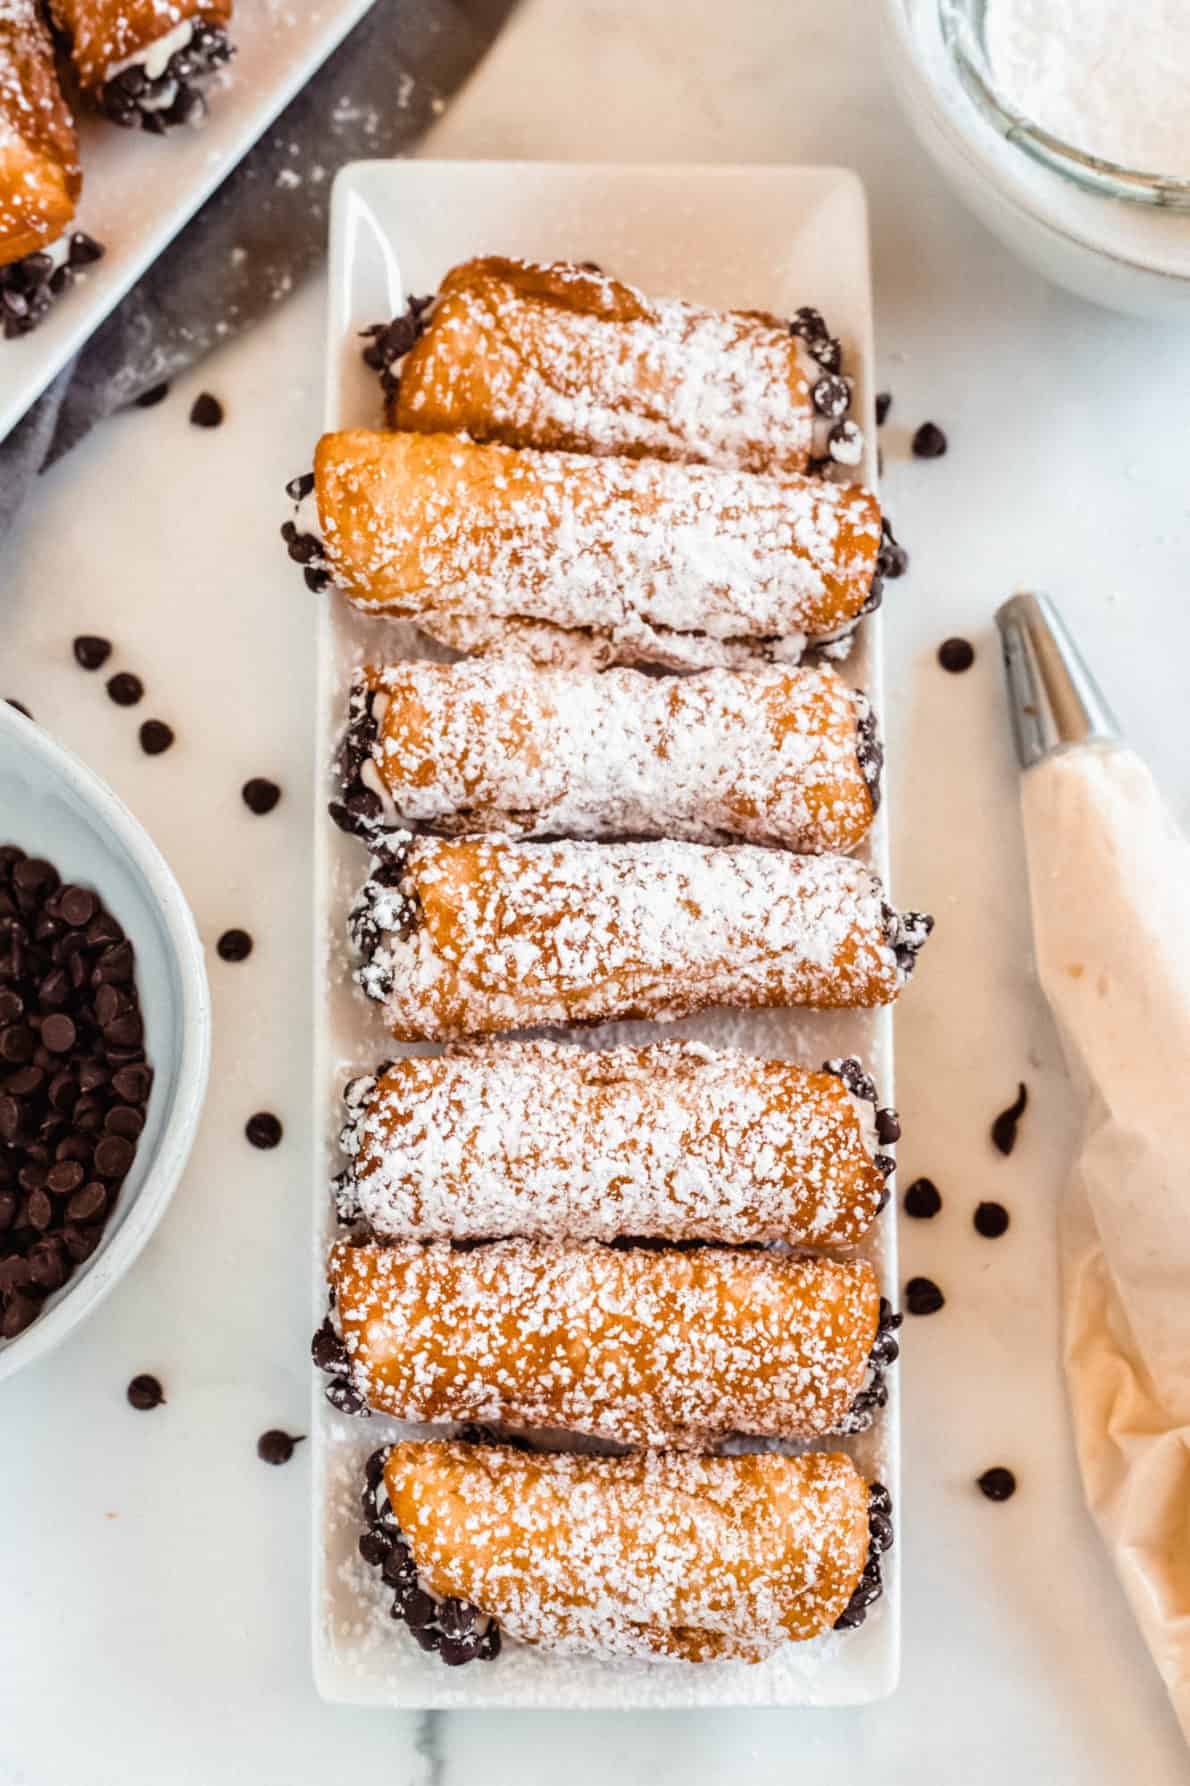 A line of homemade cannoli on a white plate.